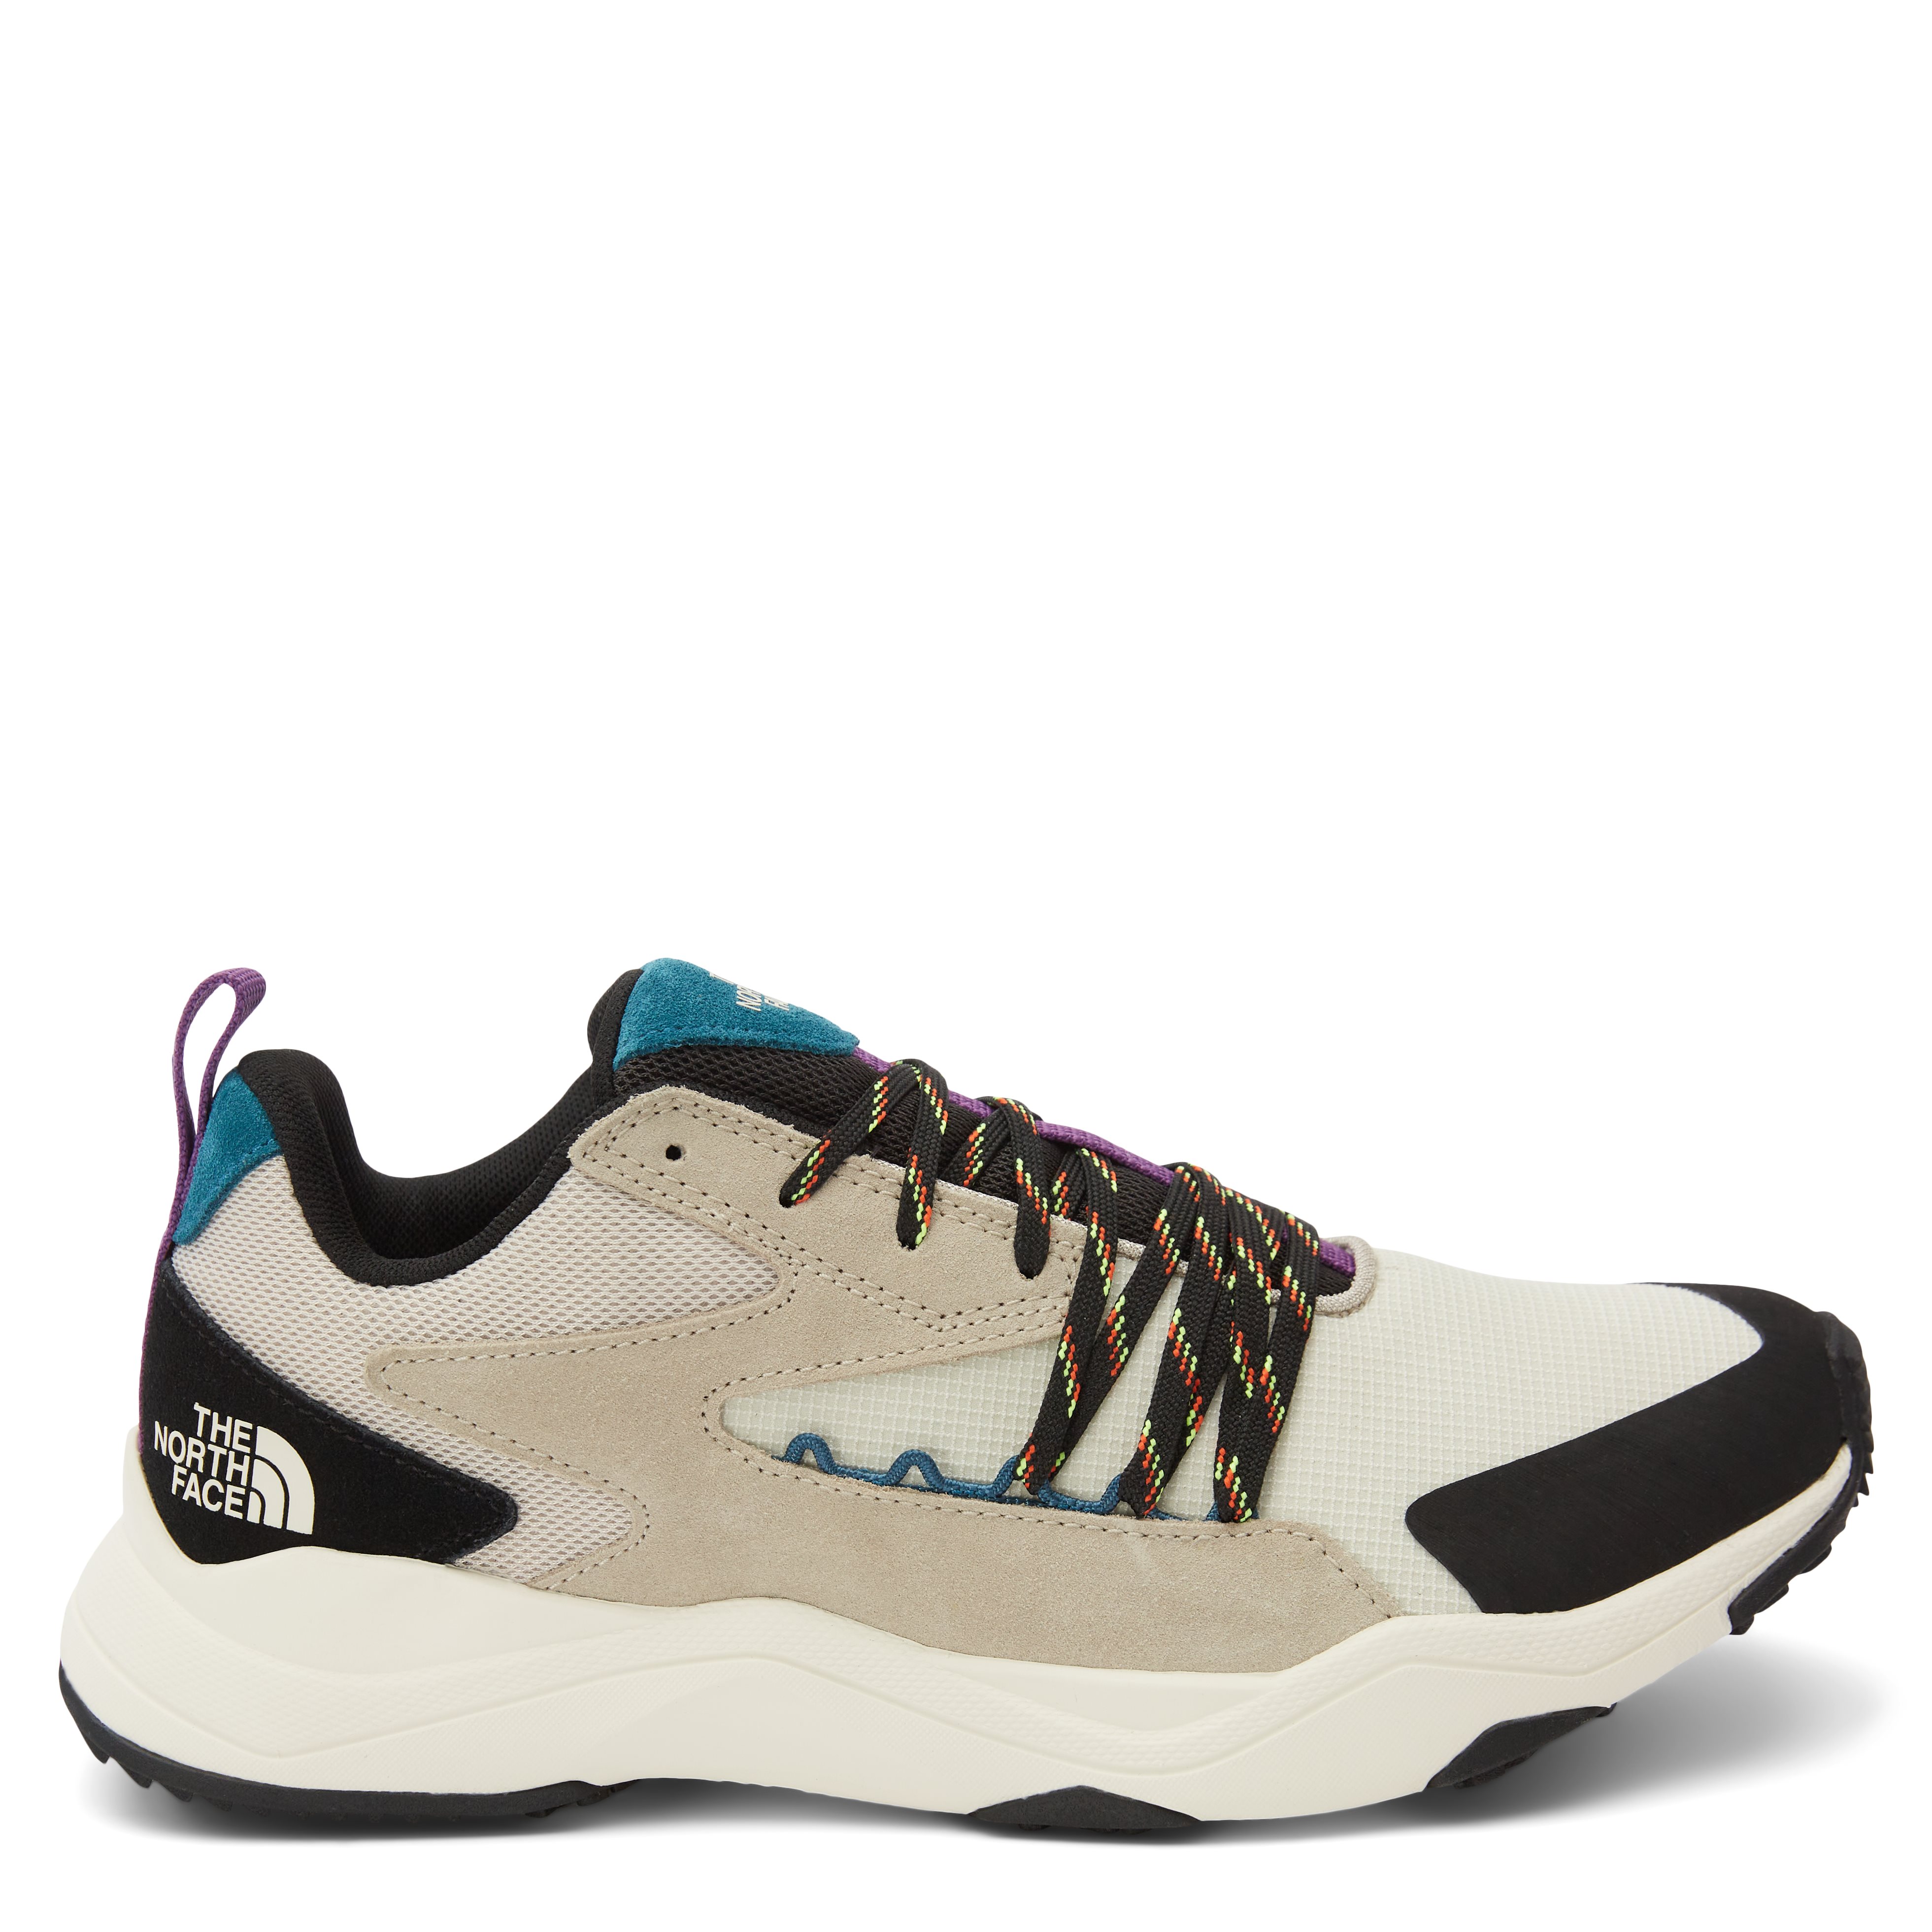 The North Face Shoes TARAVAL SPIRIT NF0A5LVN8F11 Sand